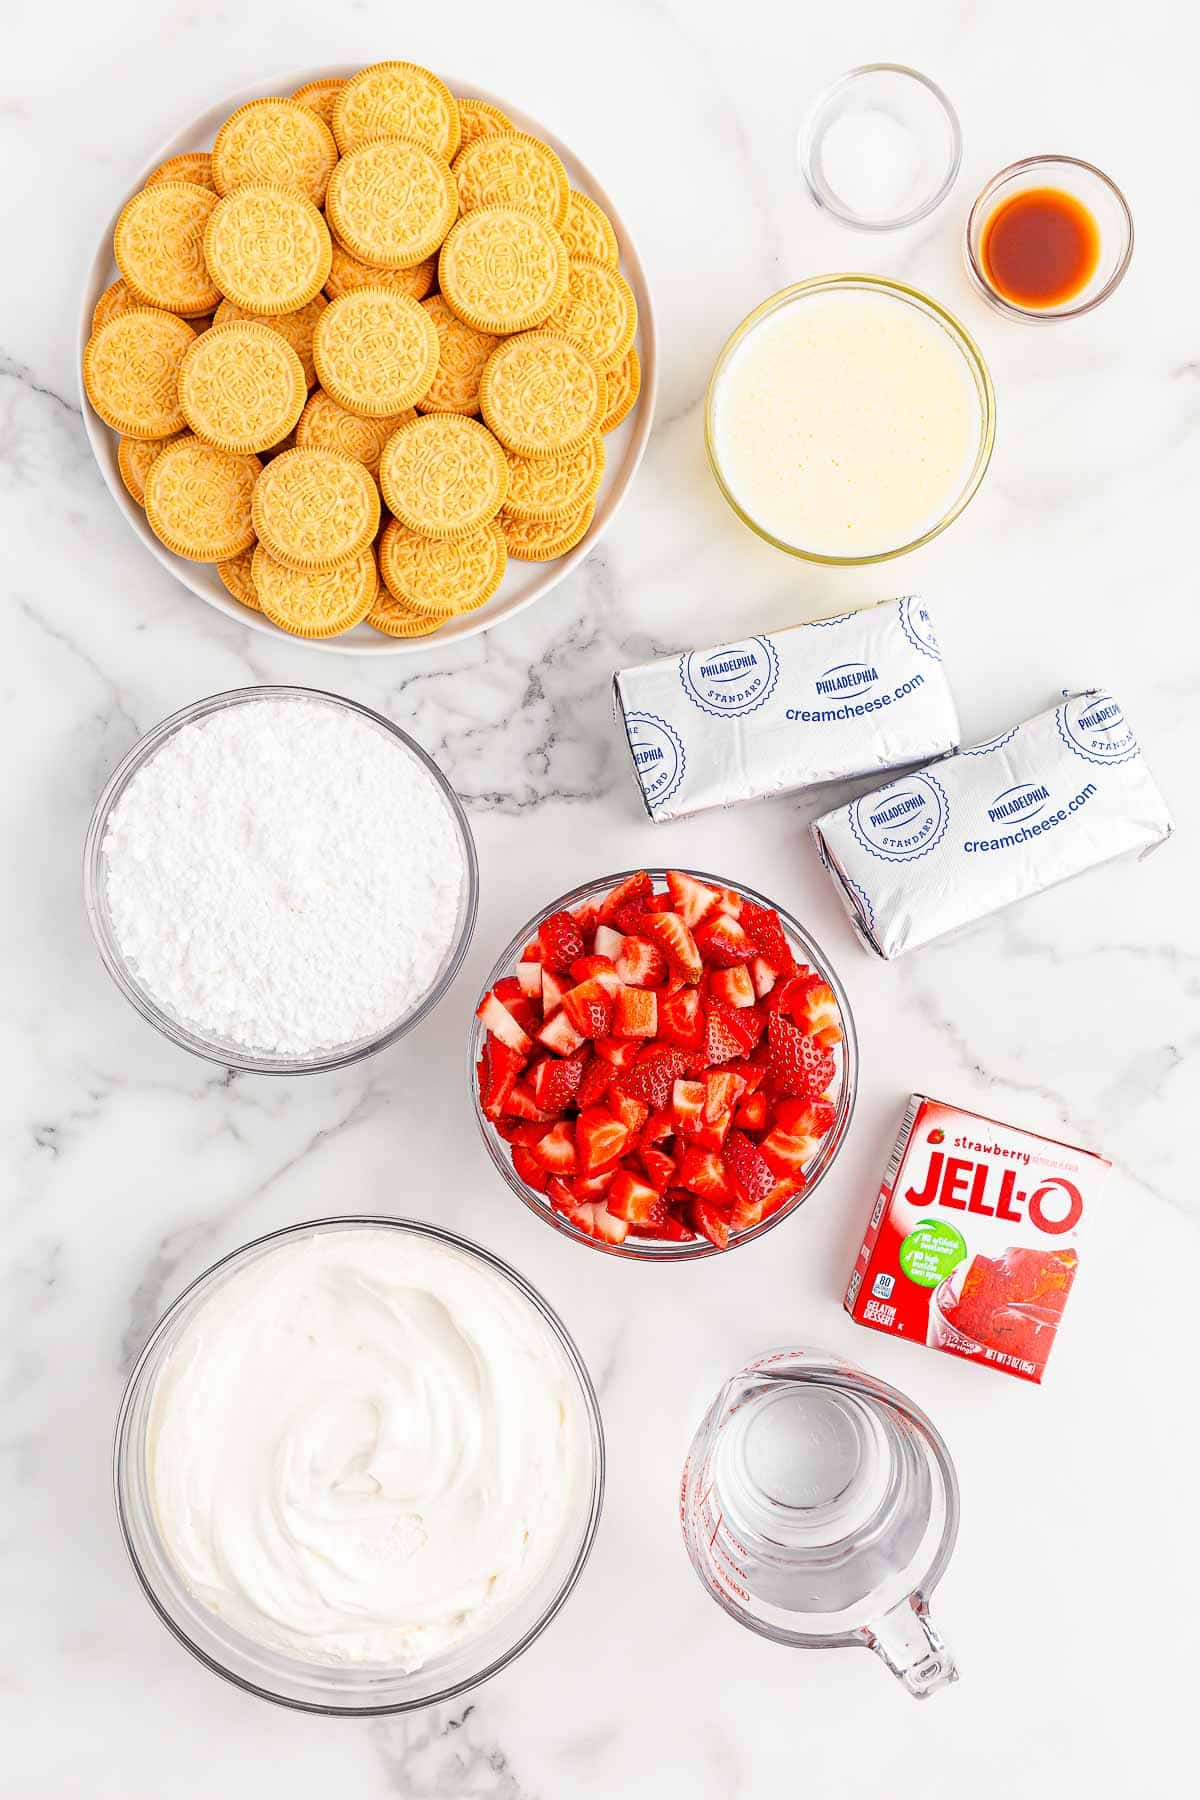 Ingredients for Strawberry delight - strawberries, strawberry jello, water, cool whip, powdered sugar, cream cheese, golden oreos, vanilla extract and salt.